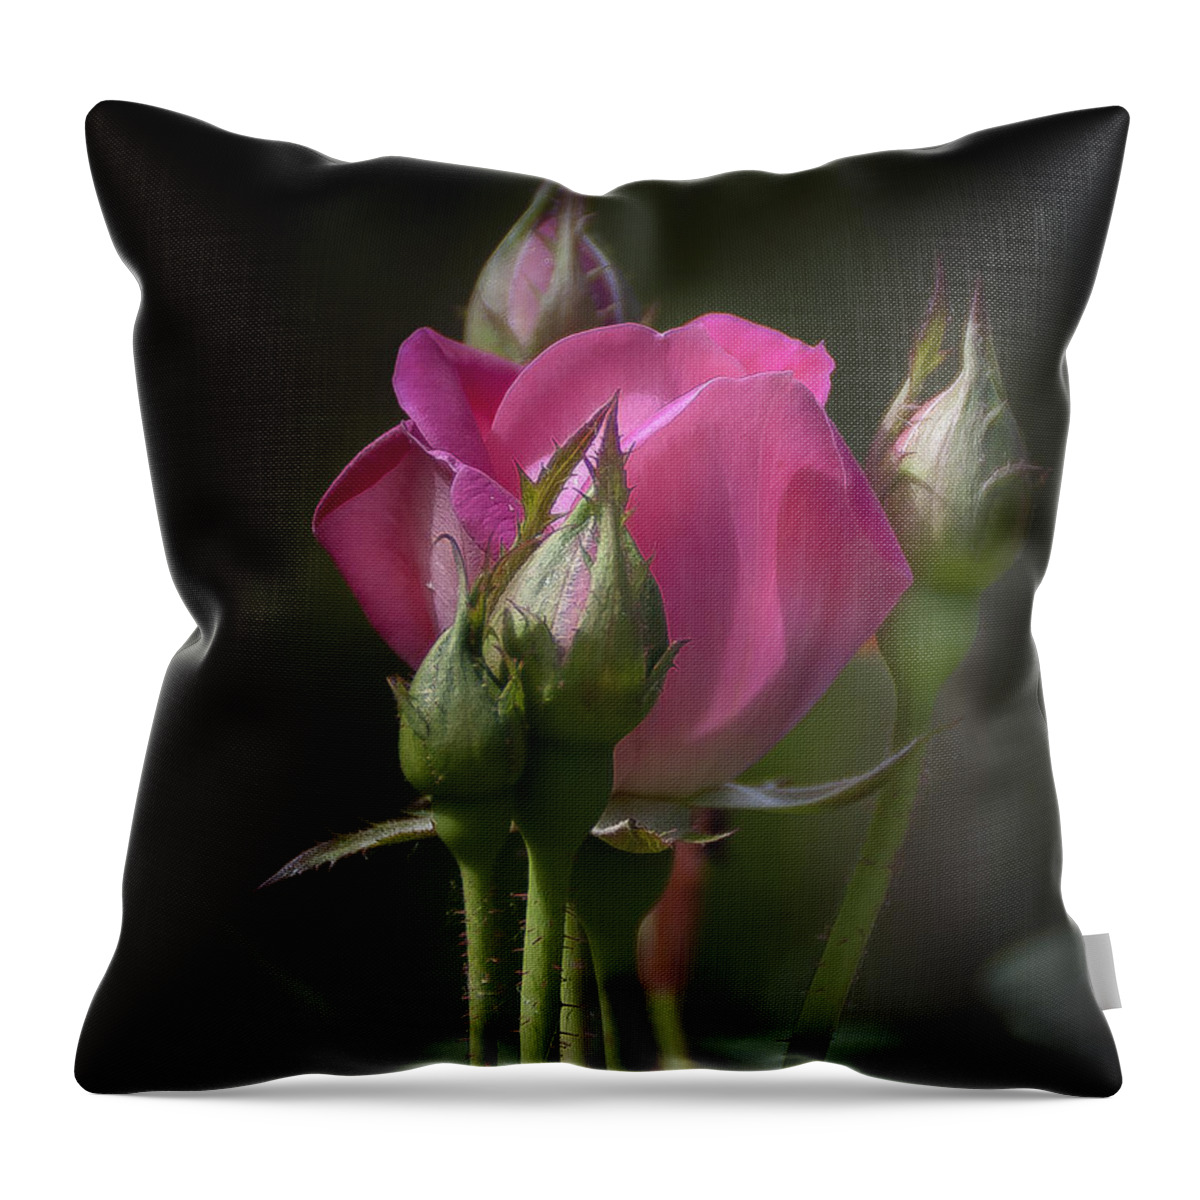 Rose Throw Pillow featuring the photograph Delicate Rose with Buds by Michele A Loftus